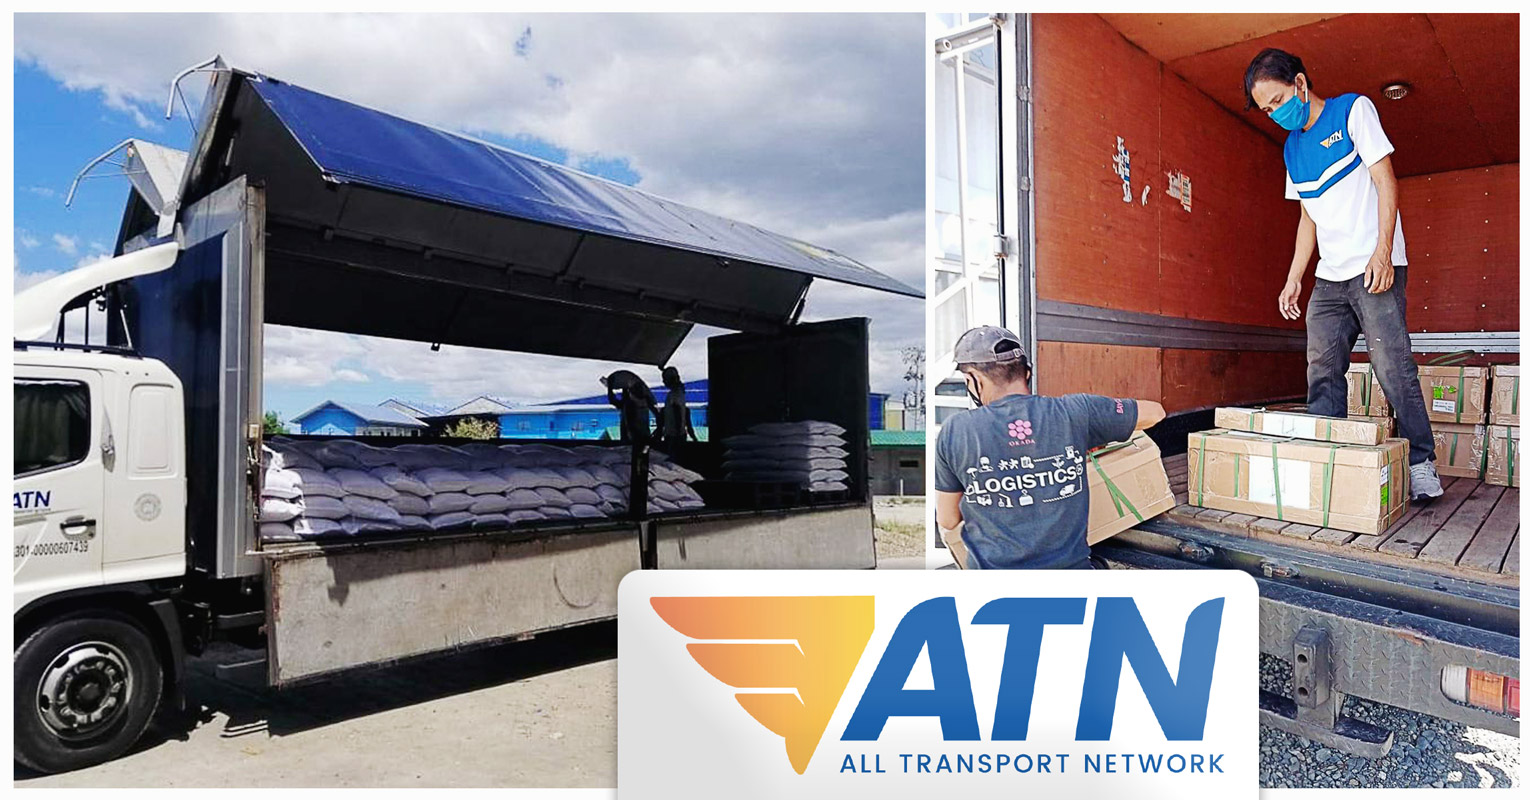 ATN Has Been Deploying Thousands of Food Packs and Relief Goods as Official Partner of the Philippines Department of Social Welfare and Development